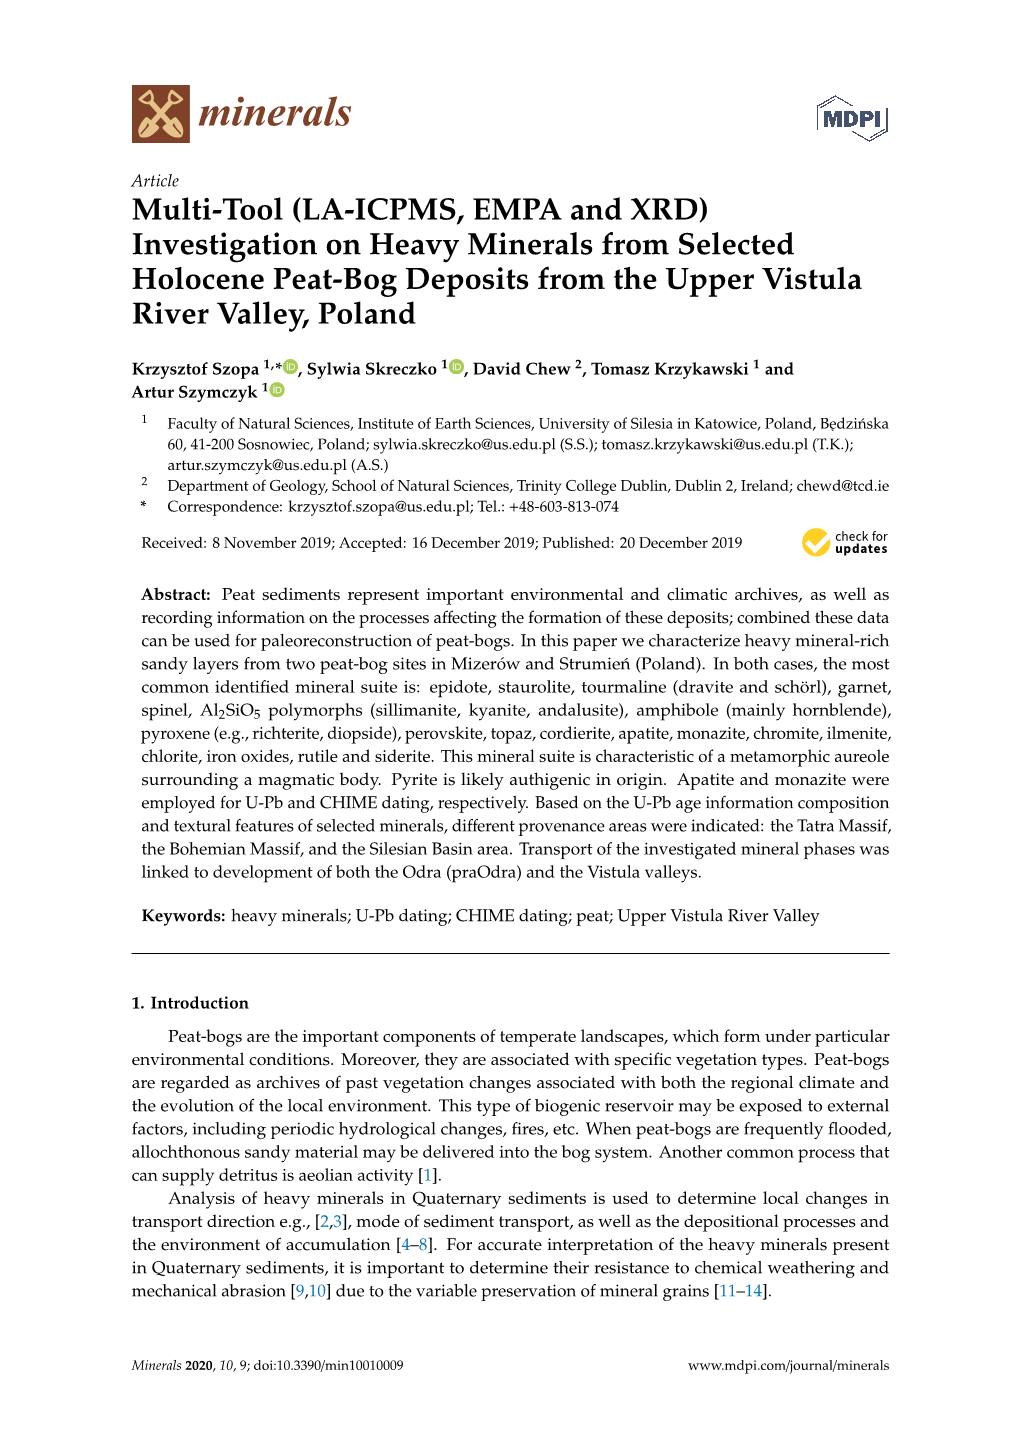 Multi-Tool (LA-ICPMS, EMPA and XRD) Investigation on Heavy Minerals from Selected Holocene Peat-Bog Deposits from the Upper Vistula River Valley, Poland